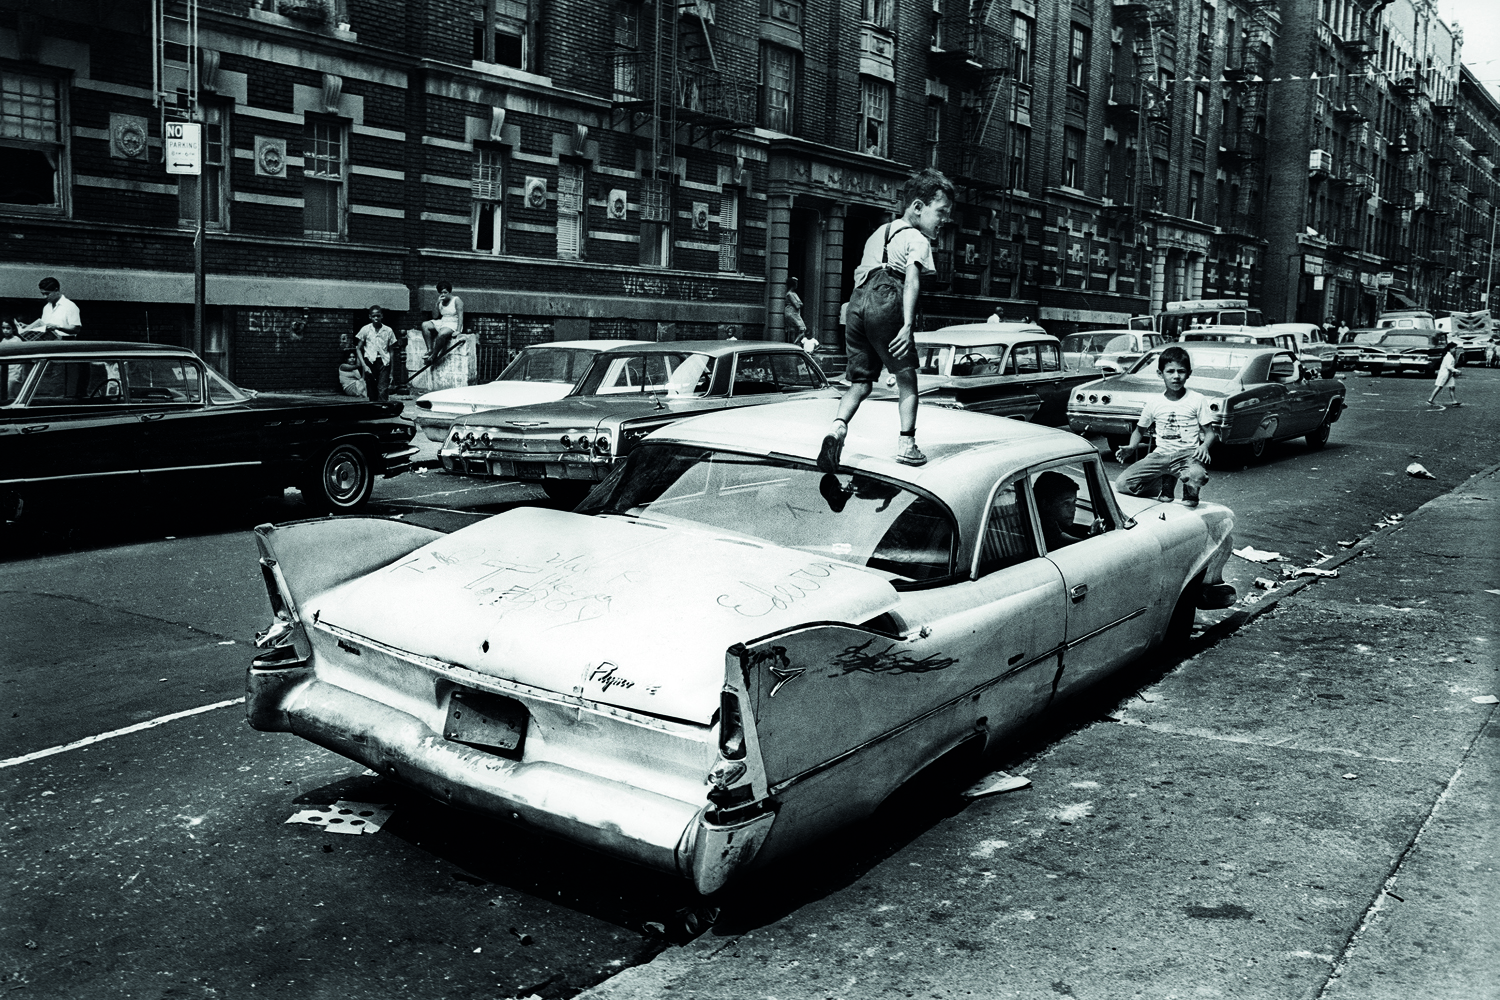 From Jean-Pierre Laffont's Photographer's Paradise, published by Glitterati
                              Bronx, New York City, NY. Summer of 1966.
                              An abandoned car becomes a place for kids to play in Fox Street.
                              From the mid-1960s to the late-1970s, quality of life for Bronx residents declined sharply.